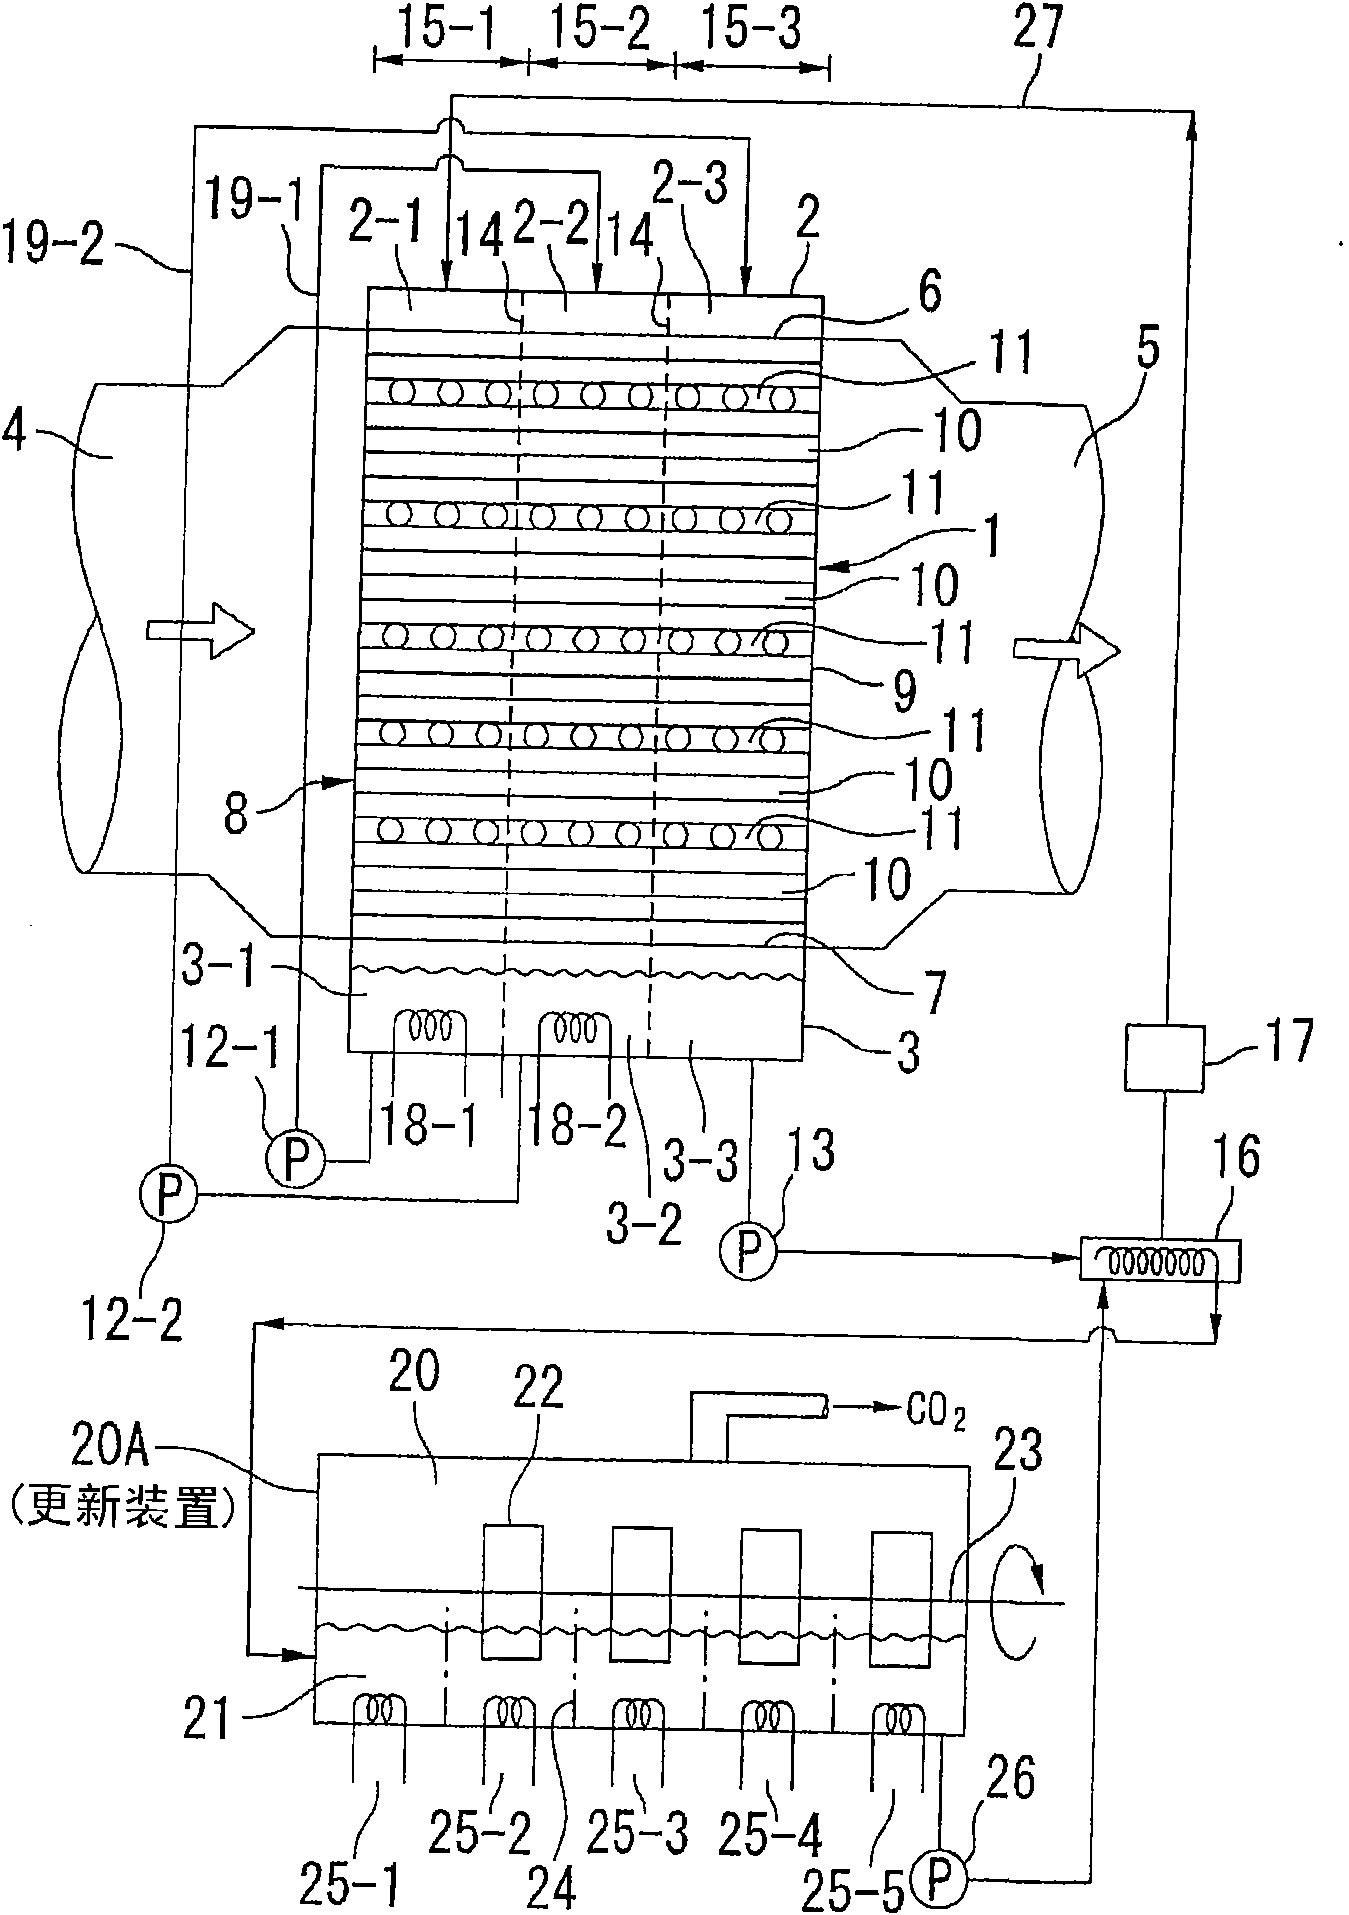 Carbon dioxide gas recovery apparatus